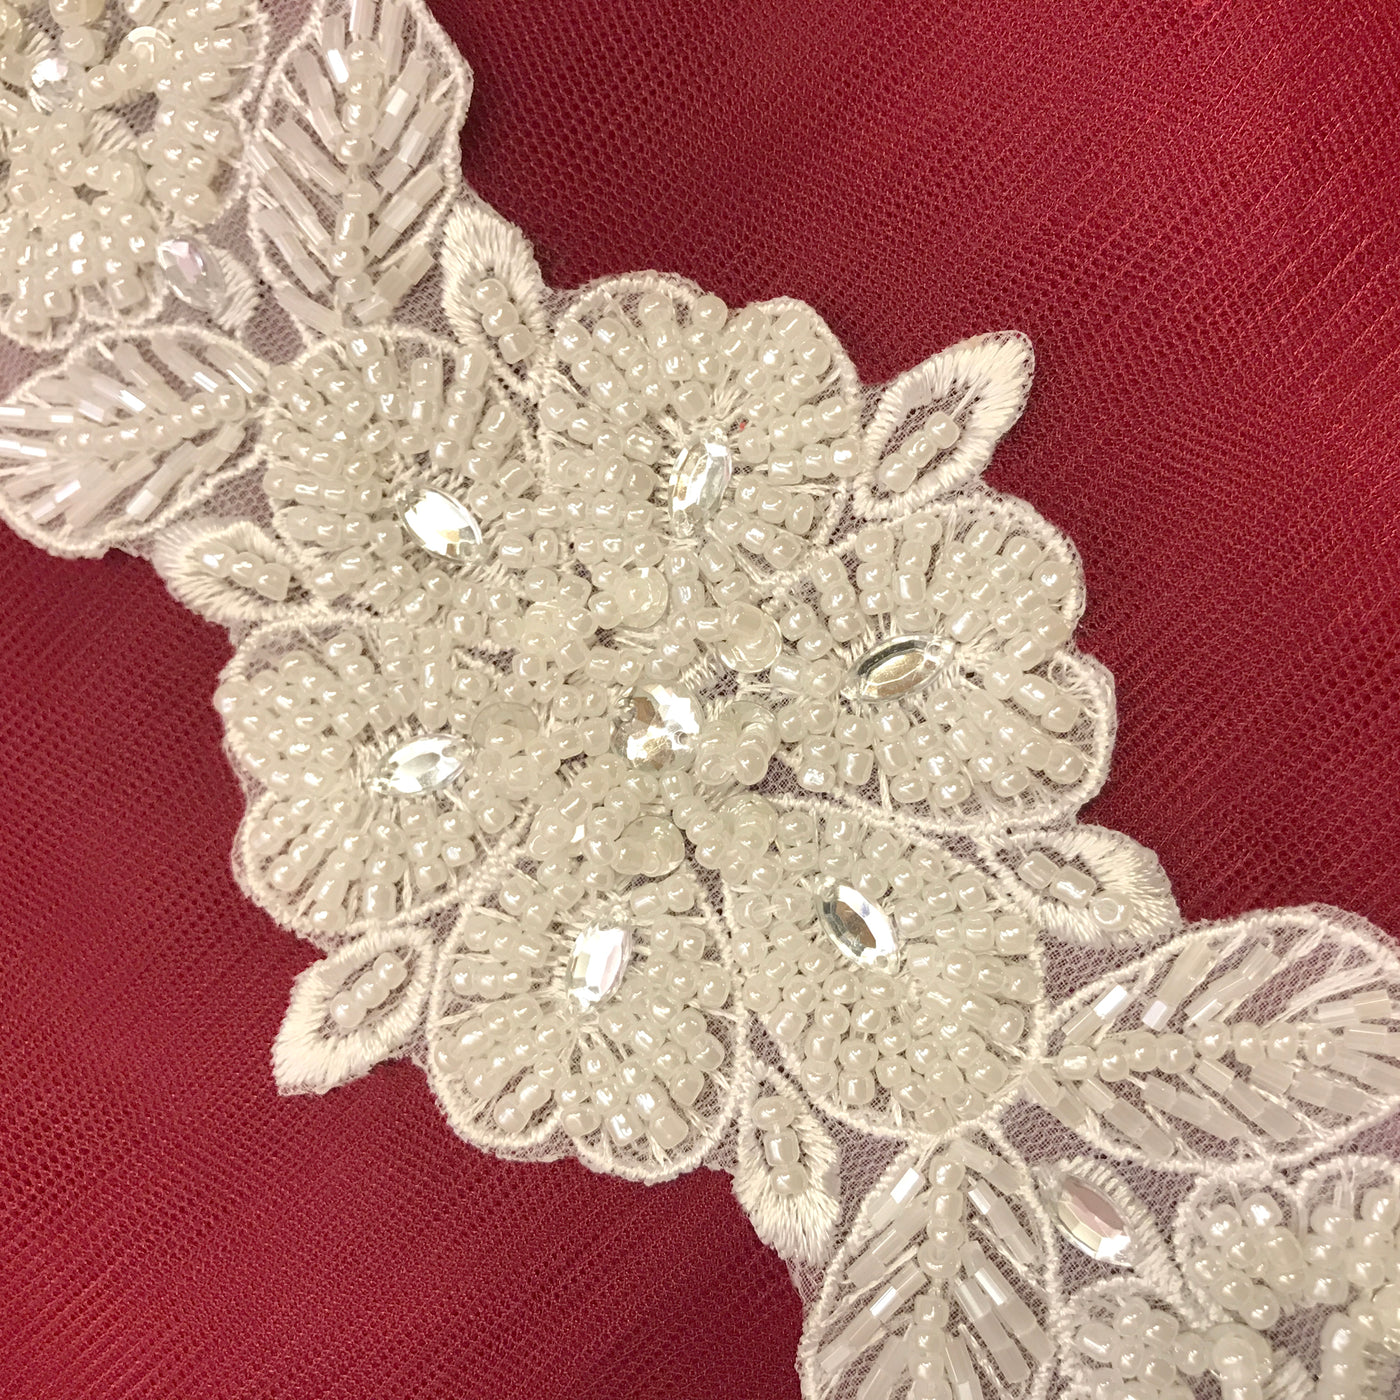 Embroidered Ivory Lace Applique Heavily Beaded with Pearls, Rhinestones and Beads on Net, sold by piece Lace Usa